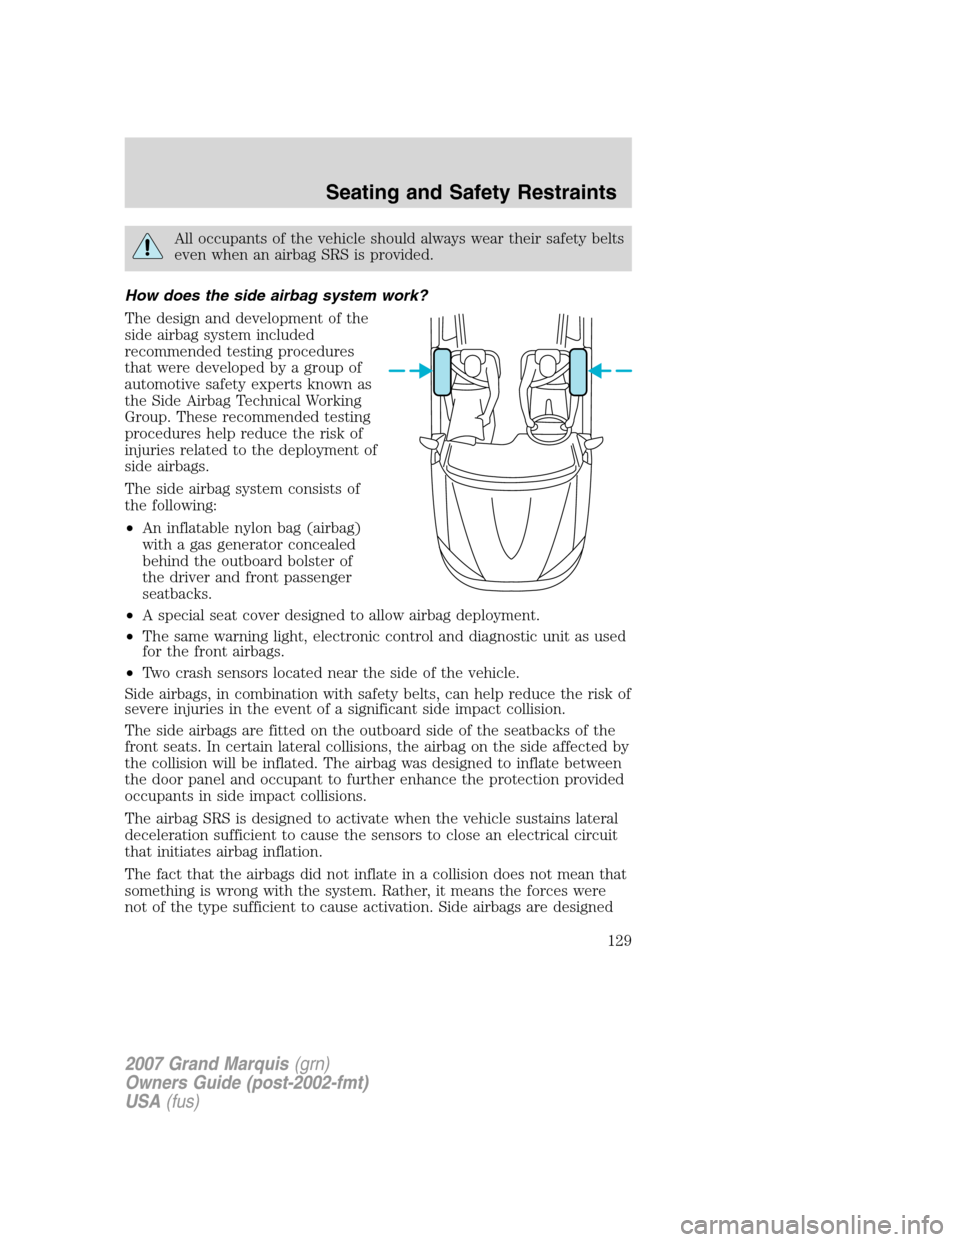 Mercury Grand Marquis 2007  s Owners Guide All occupants of the vehicle should always wear their safety belts
even when an airbag SRS is provided.
How does the side airbag system work?
The design and development of the
side airbag system inclu